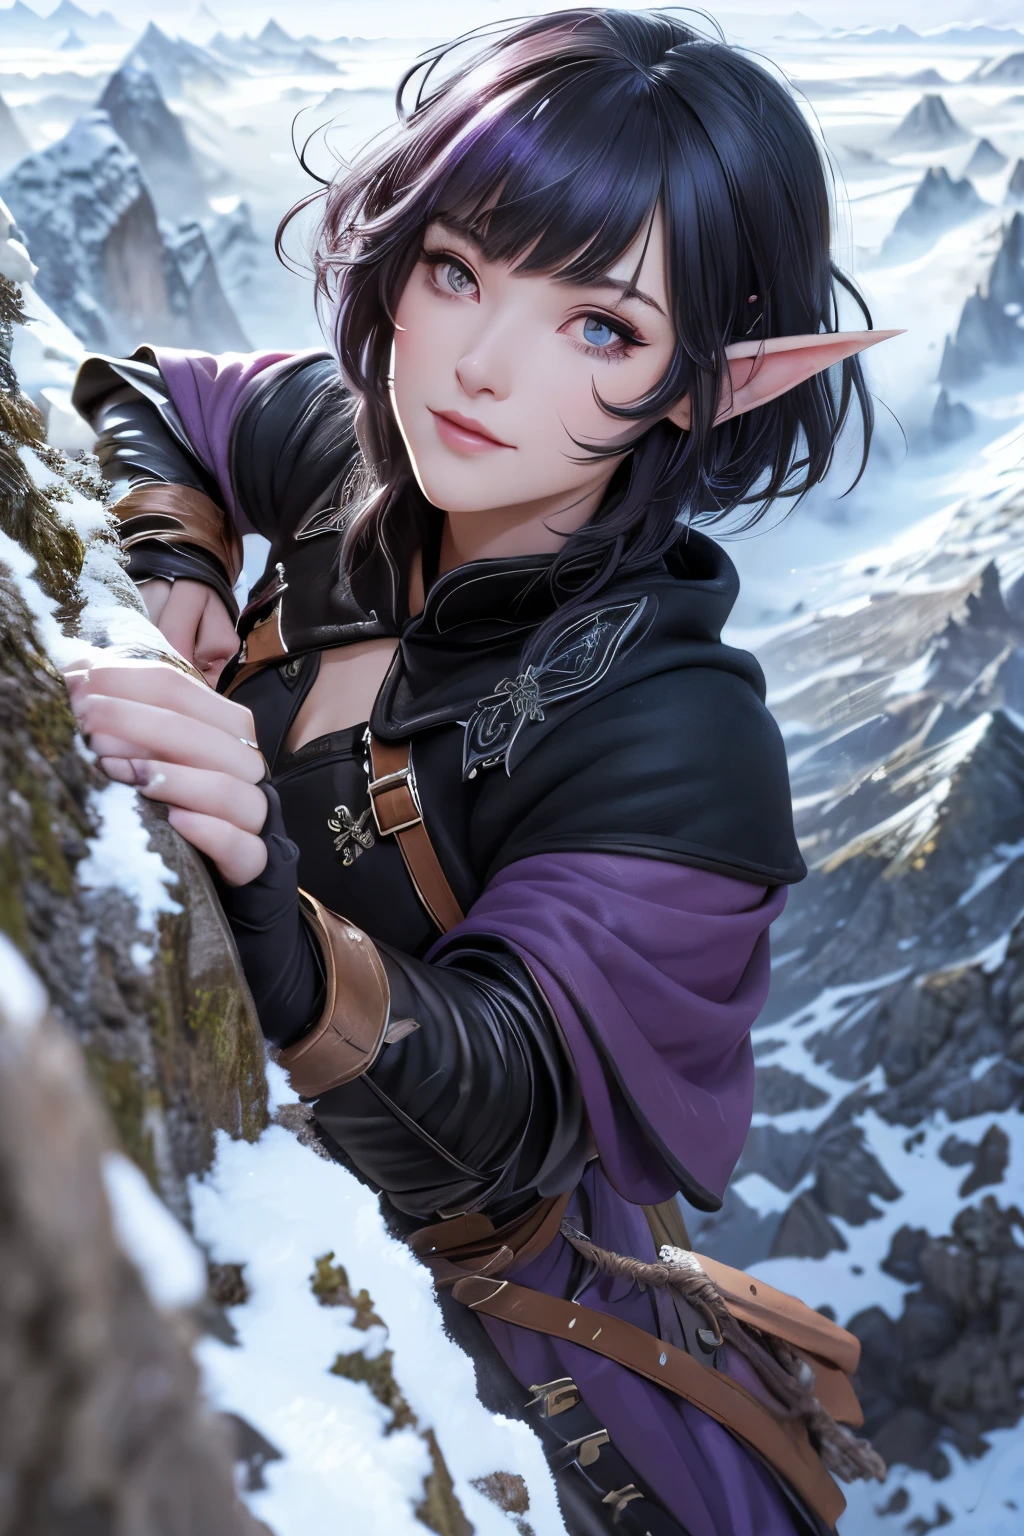 (Ultra-detailed face, sleepy eyes), (Fantasy Illustration with Gothic & Ukiyo-e & Comic Art), (Full body, A middle-aged dark elf woman with silver hair, blunt bangs, very long disheveled hair, and dark purple skin, lavender eyes), (She is wearing a well-worn black trench coat and leather climbing boots. The trench coat is double-breasted, belted, with chin warmers, gun patch, epaulettes, and a cape-like covering on the back), (She has a grim face, breathes heavily, and uses a rope to climb a steep blizzard-blowing snowy mountain cliff), BREAK (Below her we see snow-covered mountains, strong winds, and falling snow)